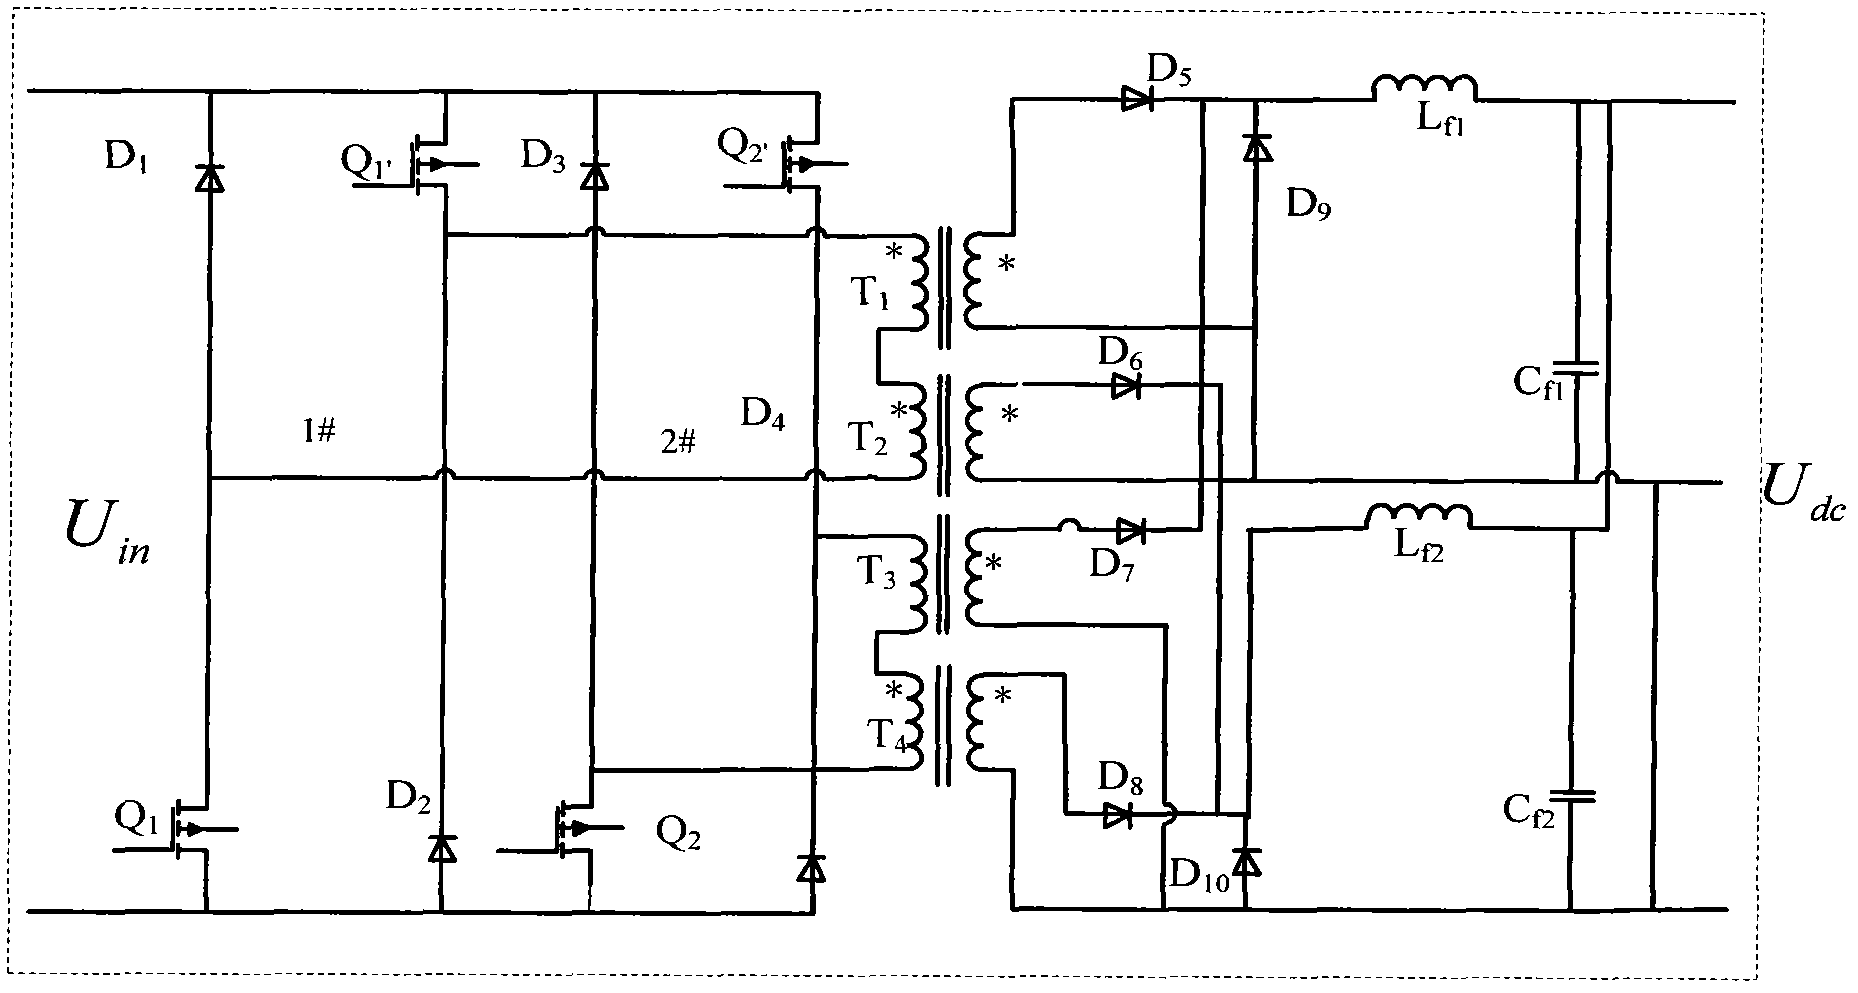 Two-path two-transistor forward DC (Direct Current) converter with serially-connected transformers